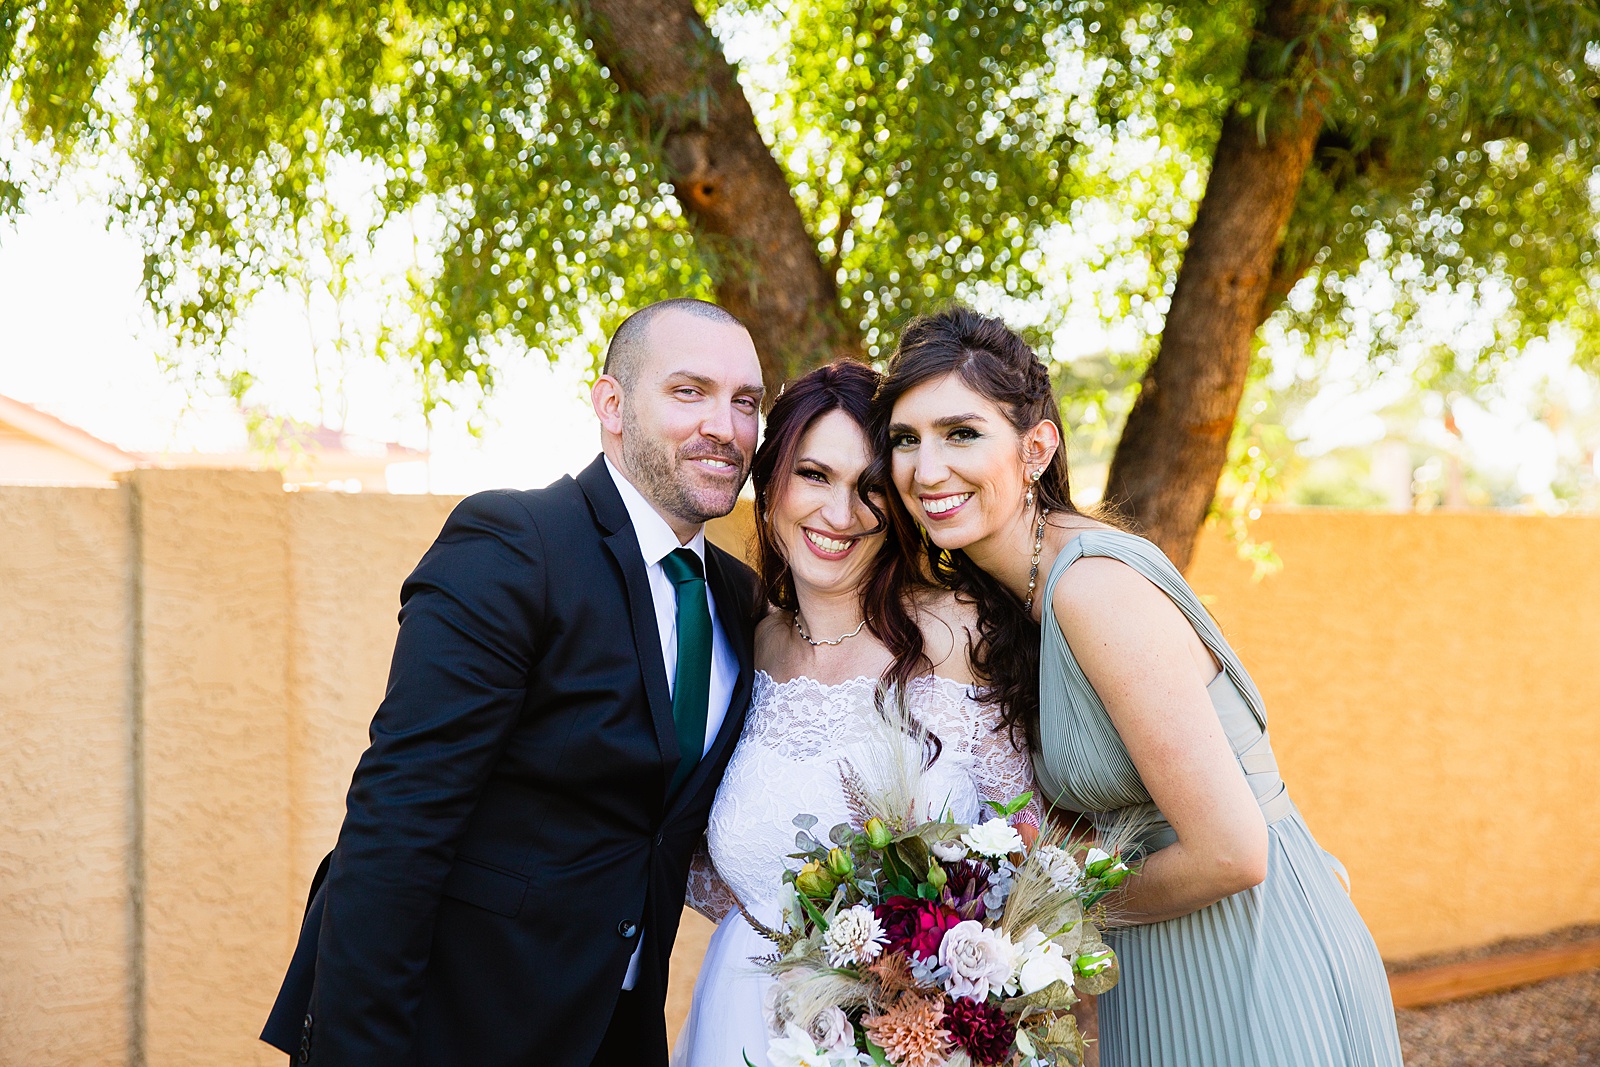 Bride and mixed gender bridal party laughing together at a Backyard Micro wedding by Arizona wedding photographer PMA Photography.